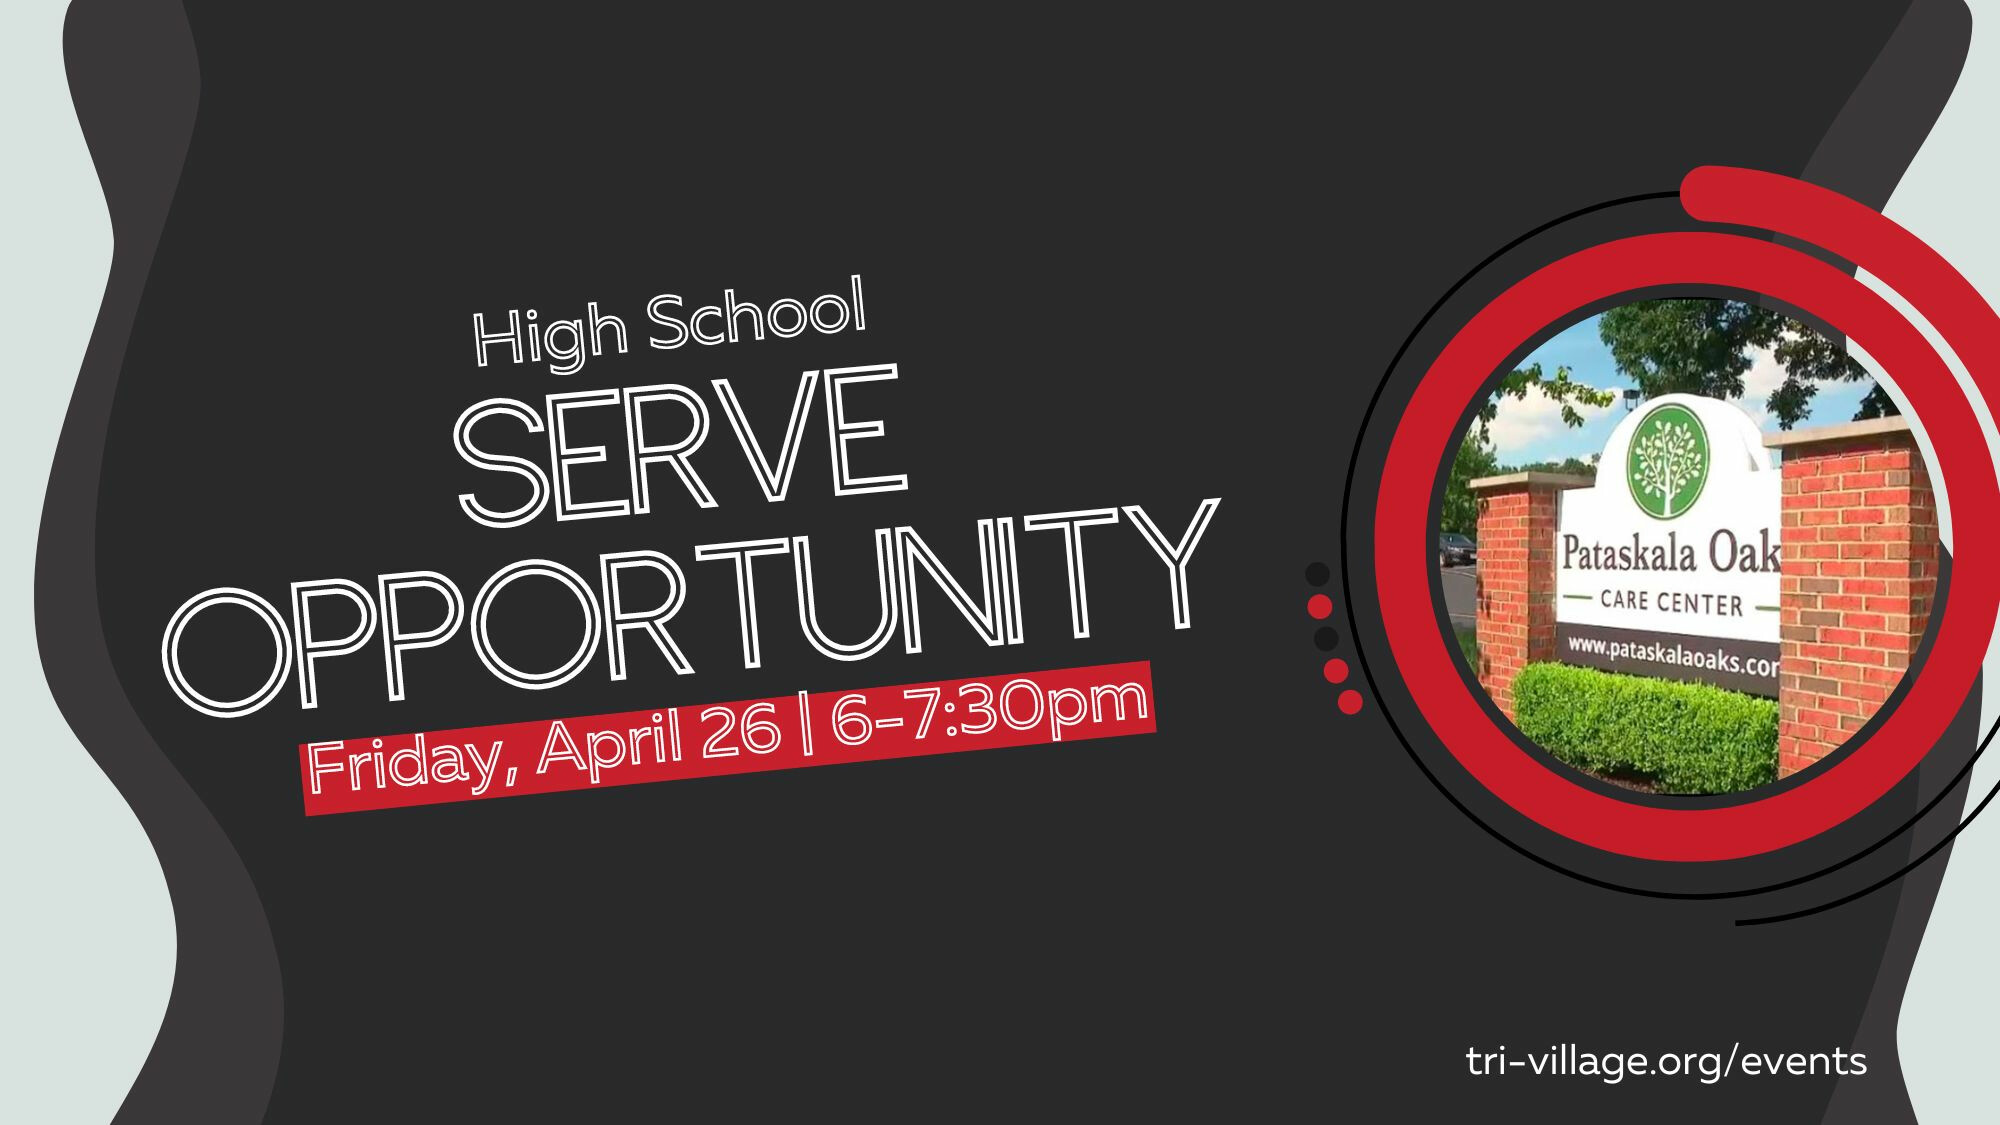 High School Service Opportunity